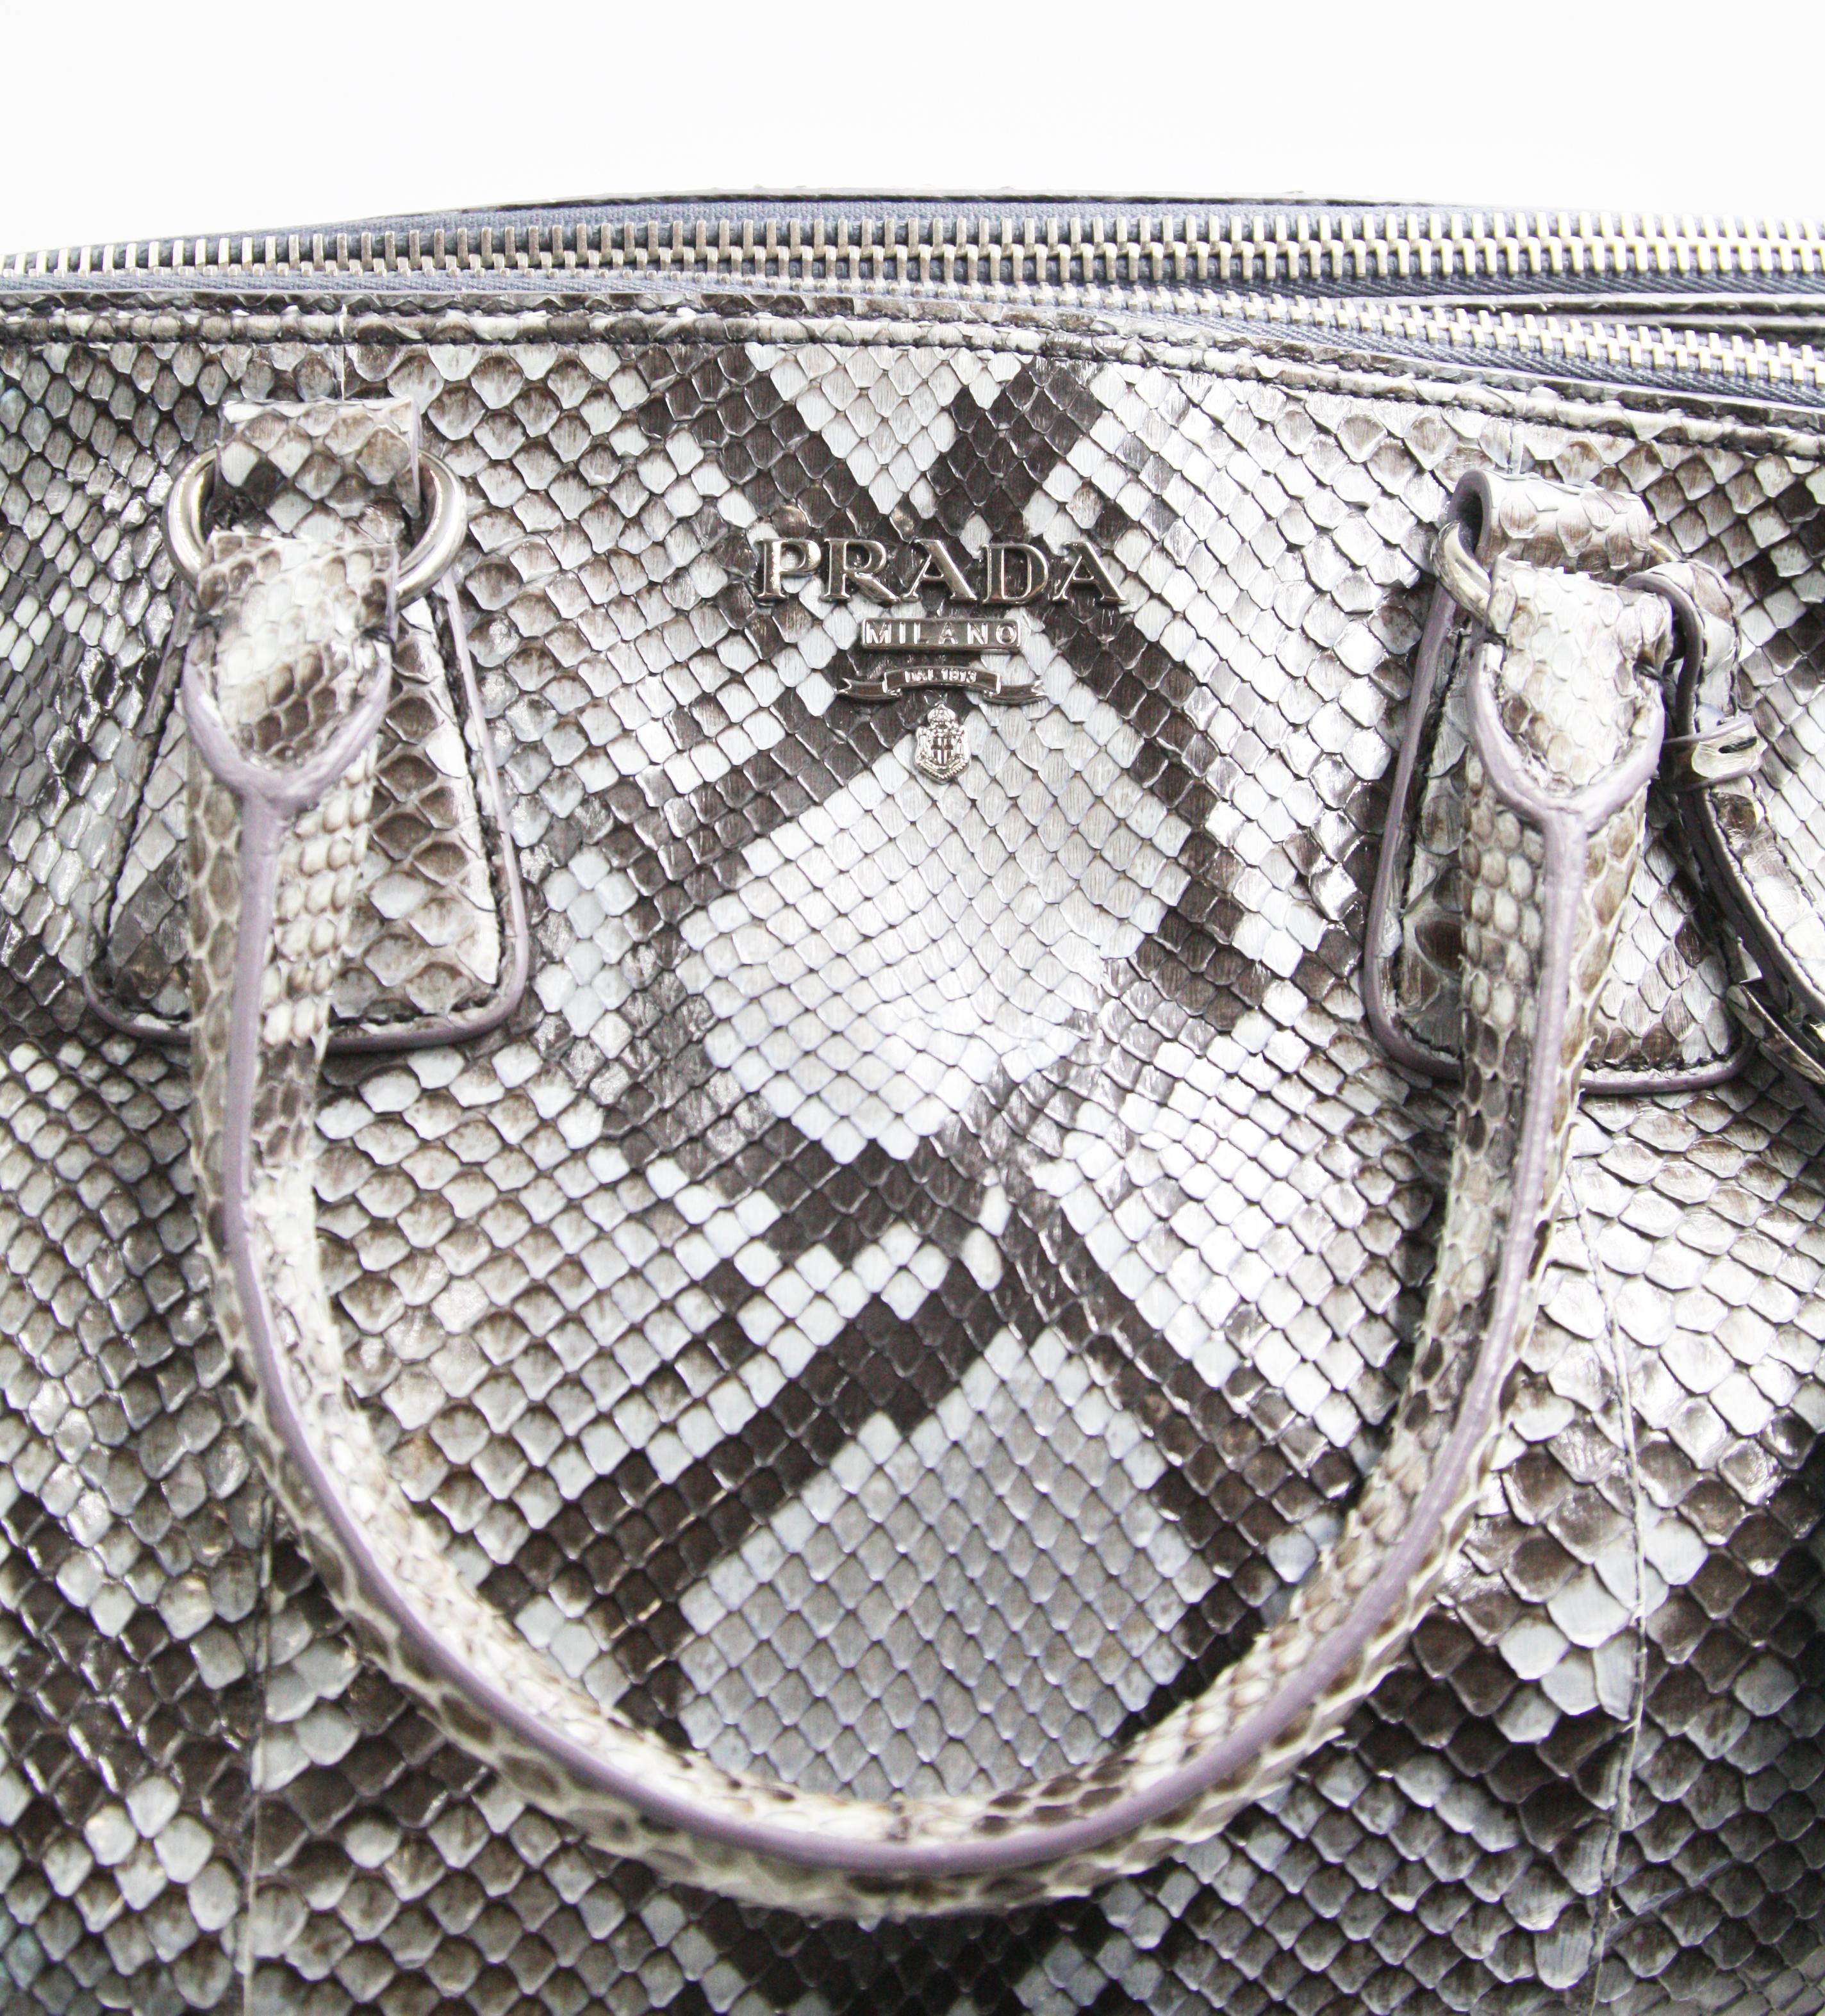 his Prada Tote Python Large, crafted from genuine gray python, features dual rolled handles, raised Prada logo, and silver-tone hardware. It opens to a pale pink leather interior with two zip compartments on both sides and an open top middle